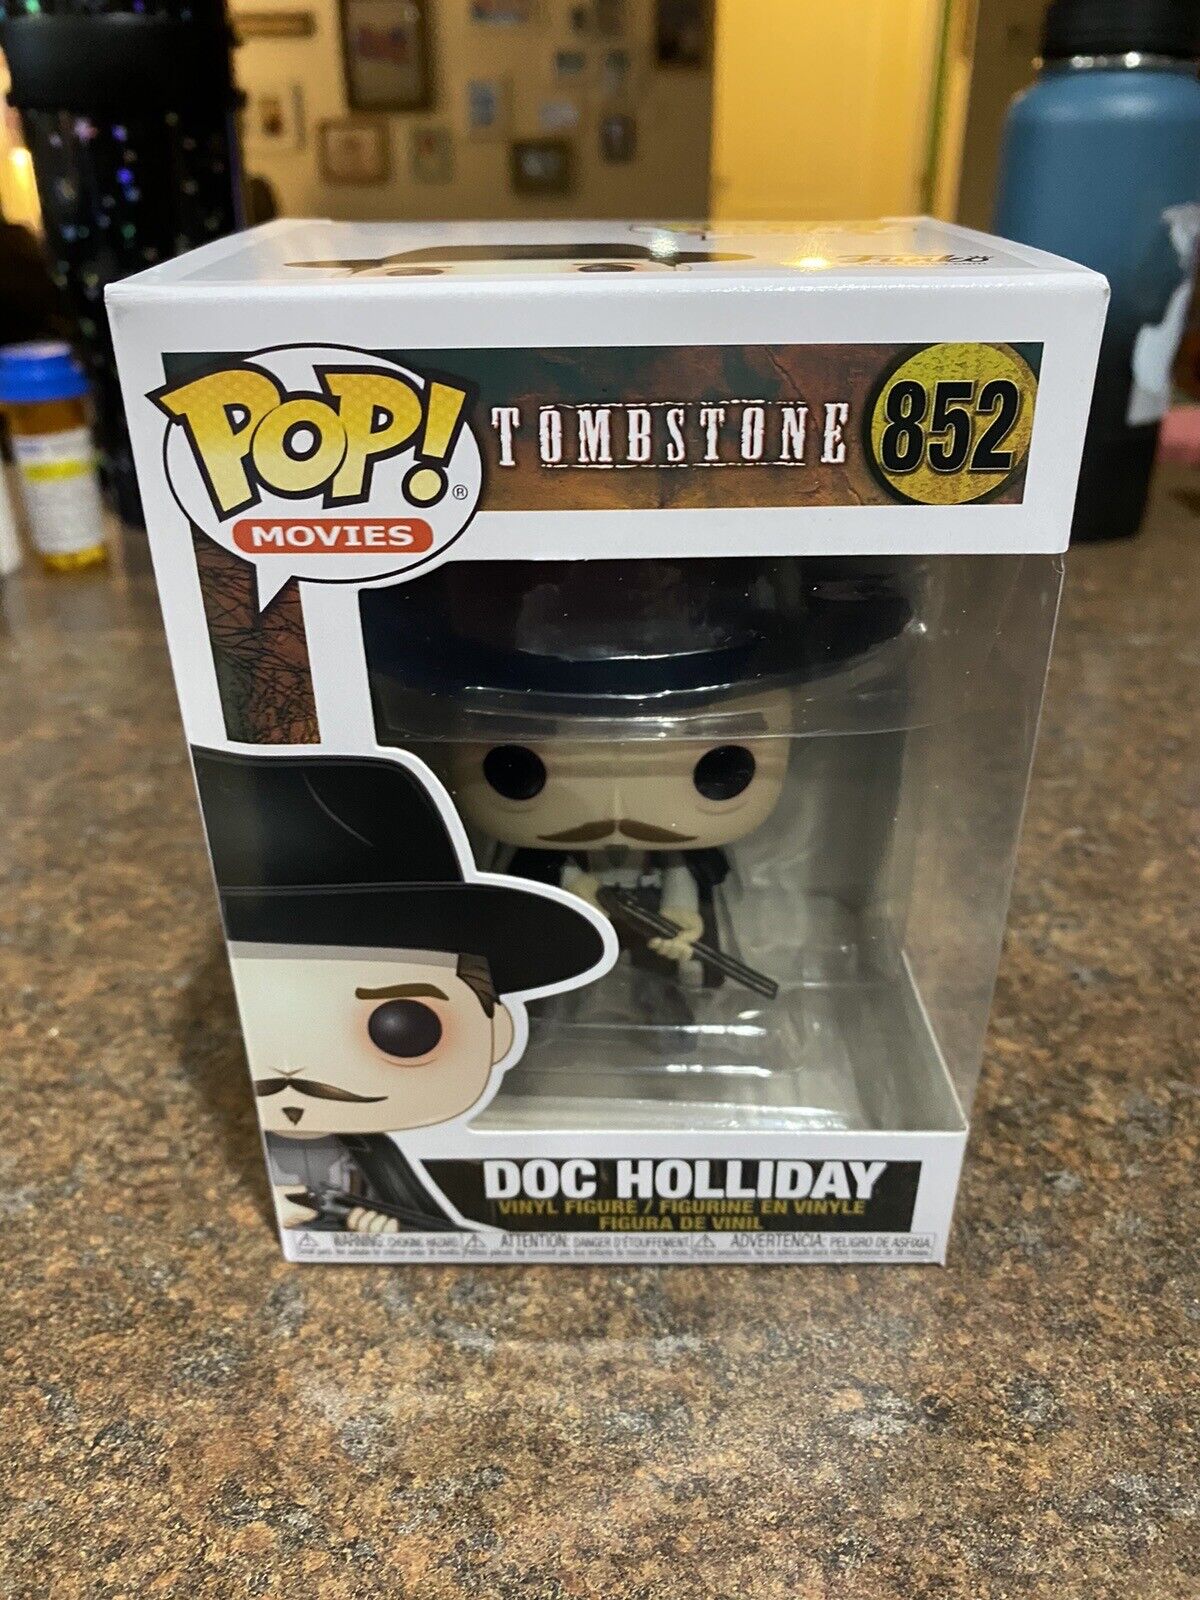 DOC HOLLIDAY FUNKO POP #852 TOMBSTONE VAULTED/RETIRED